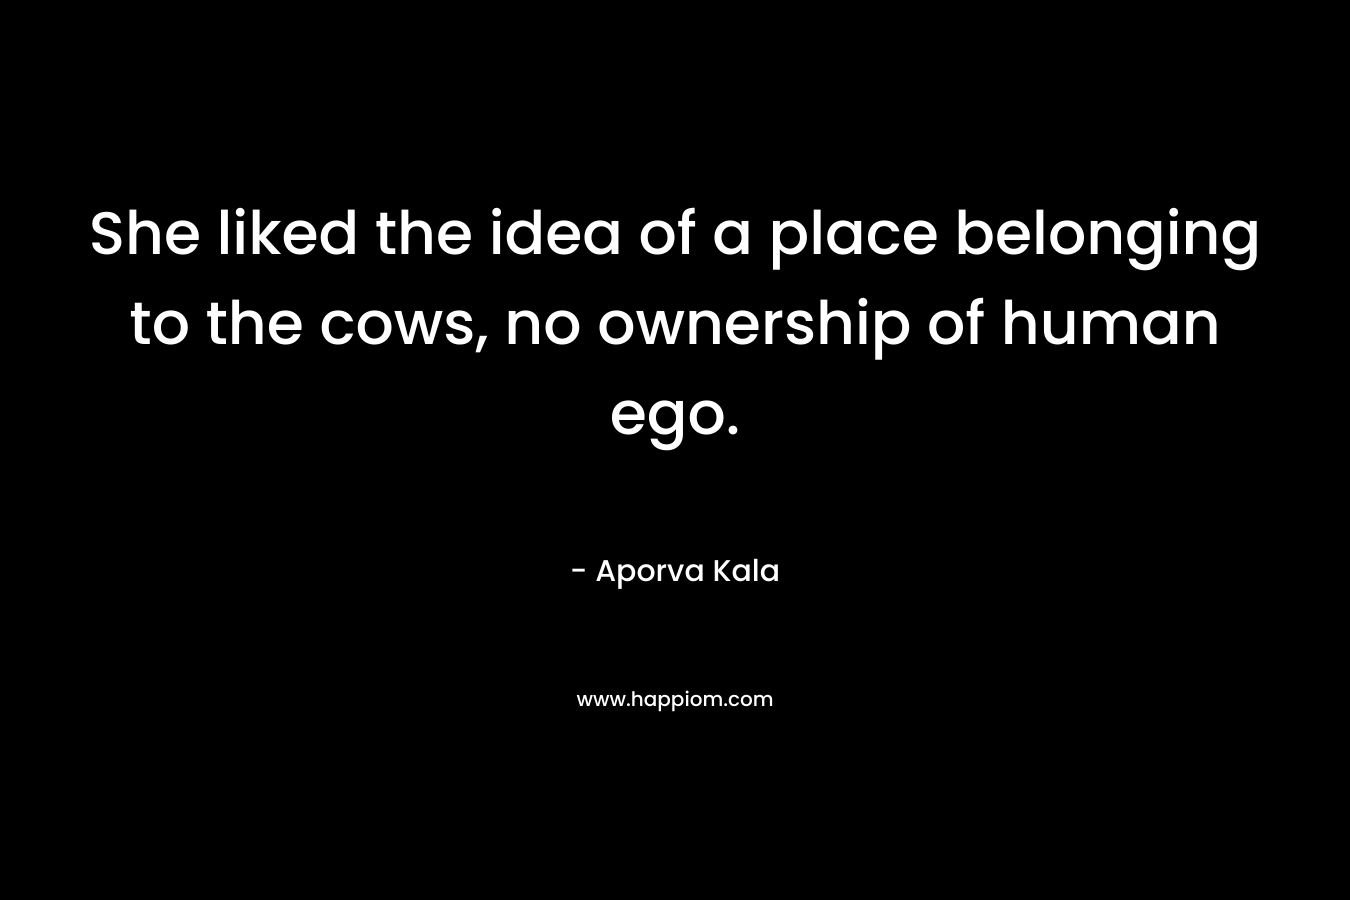 She liked the idea of a place belonging to the cows, no ownership of human ego. – Aporva Kala